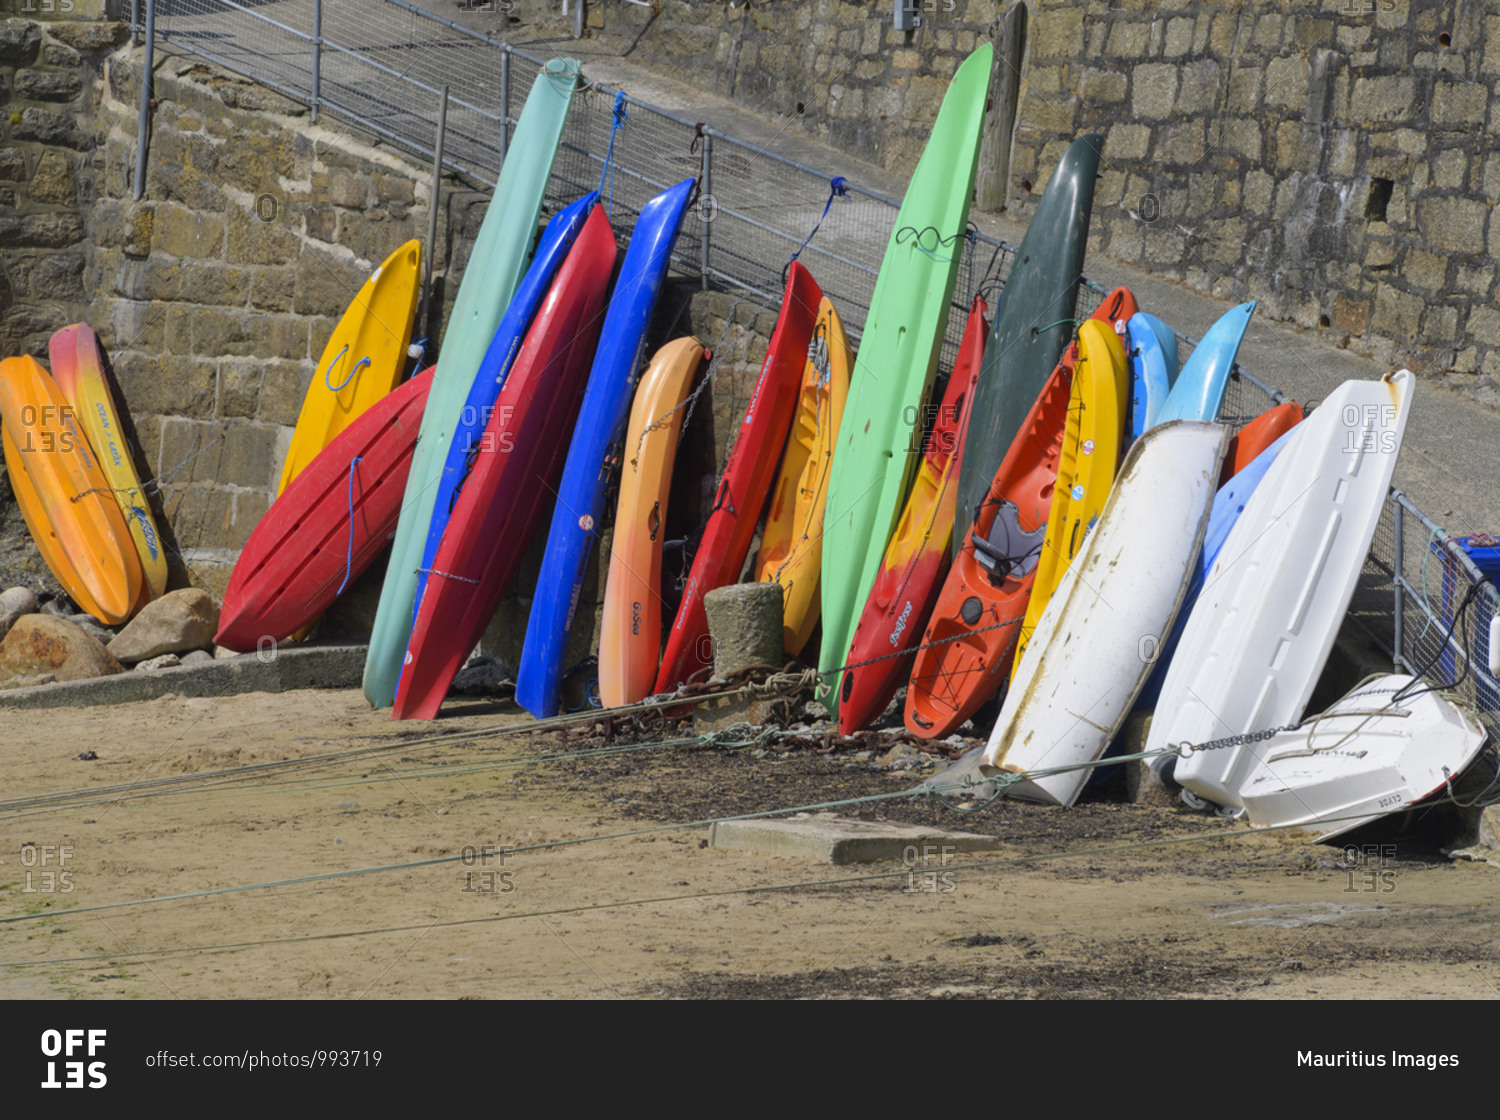 May 28, 2018: Colorful surfboards in the harbor, Mousehole,\
Penzance, Cornwall, South West England, England, United Kingdom,\
Europe stock photo - OFFSET